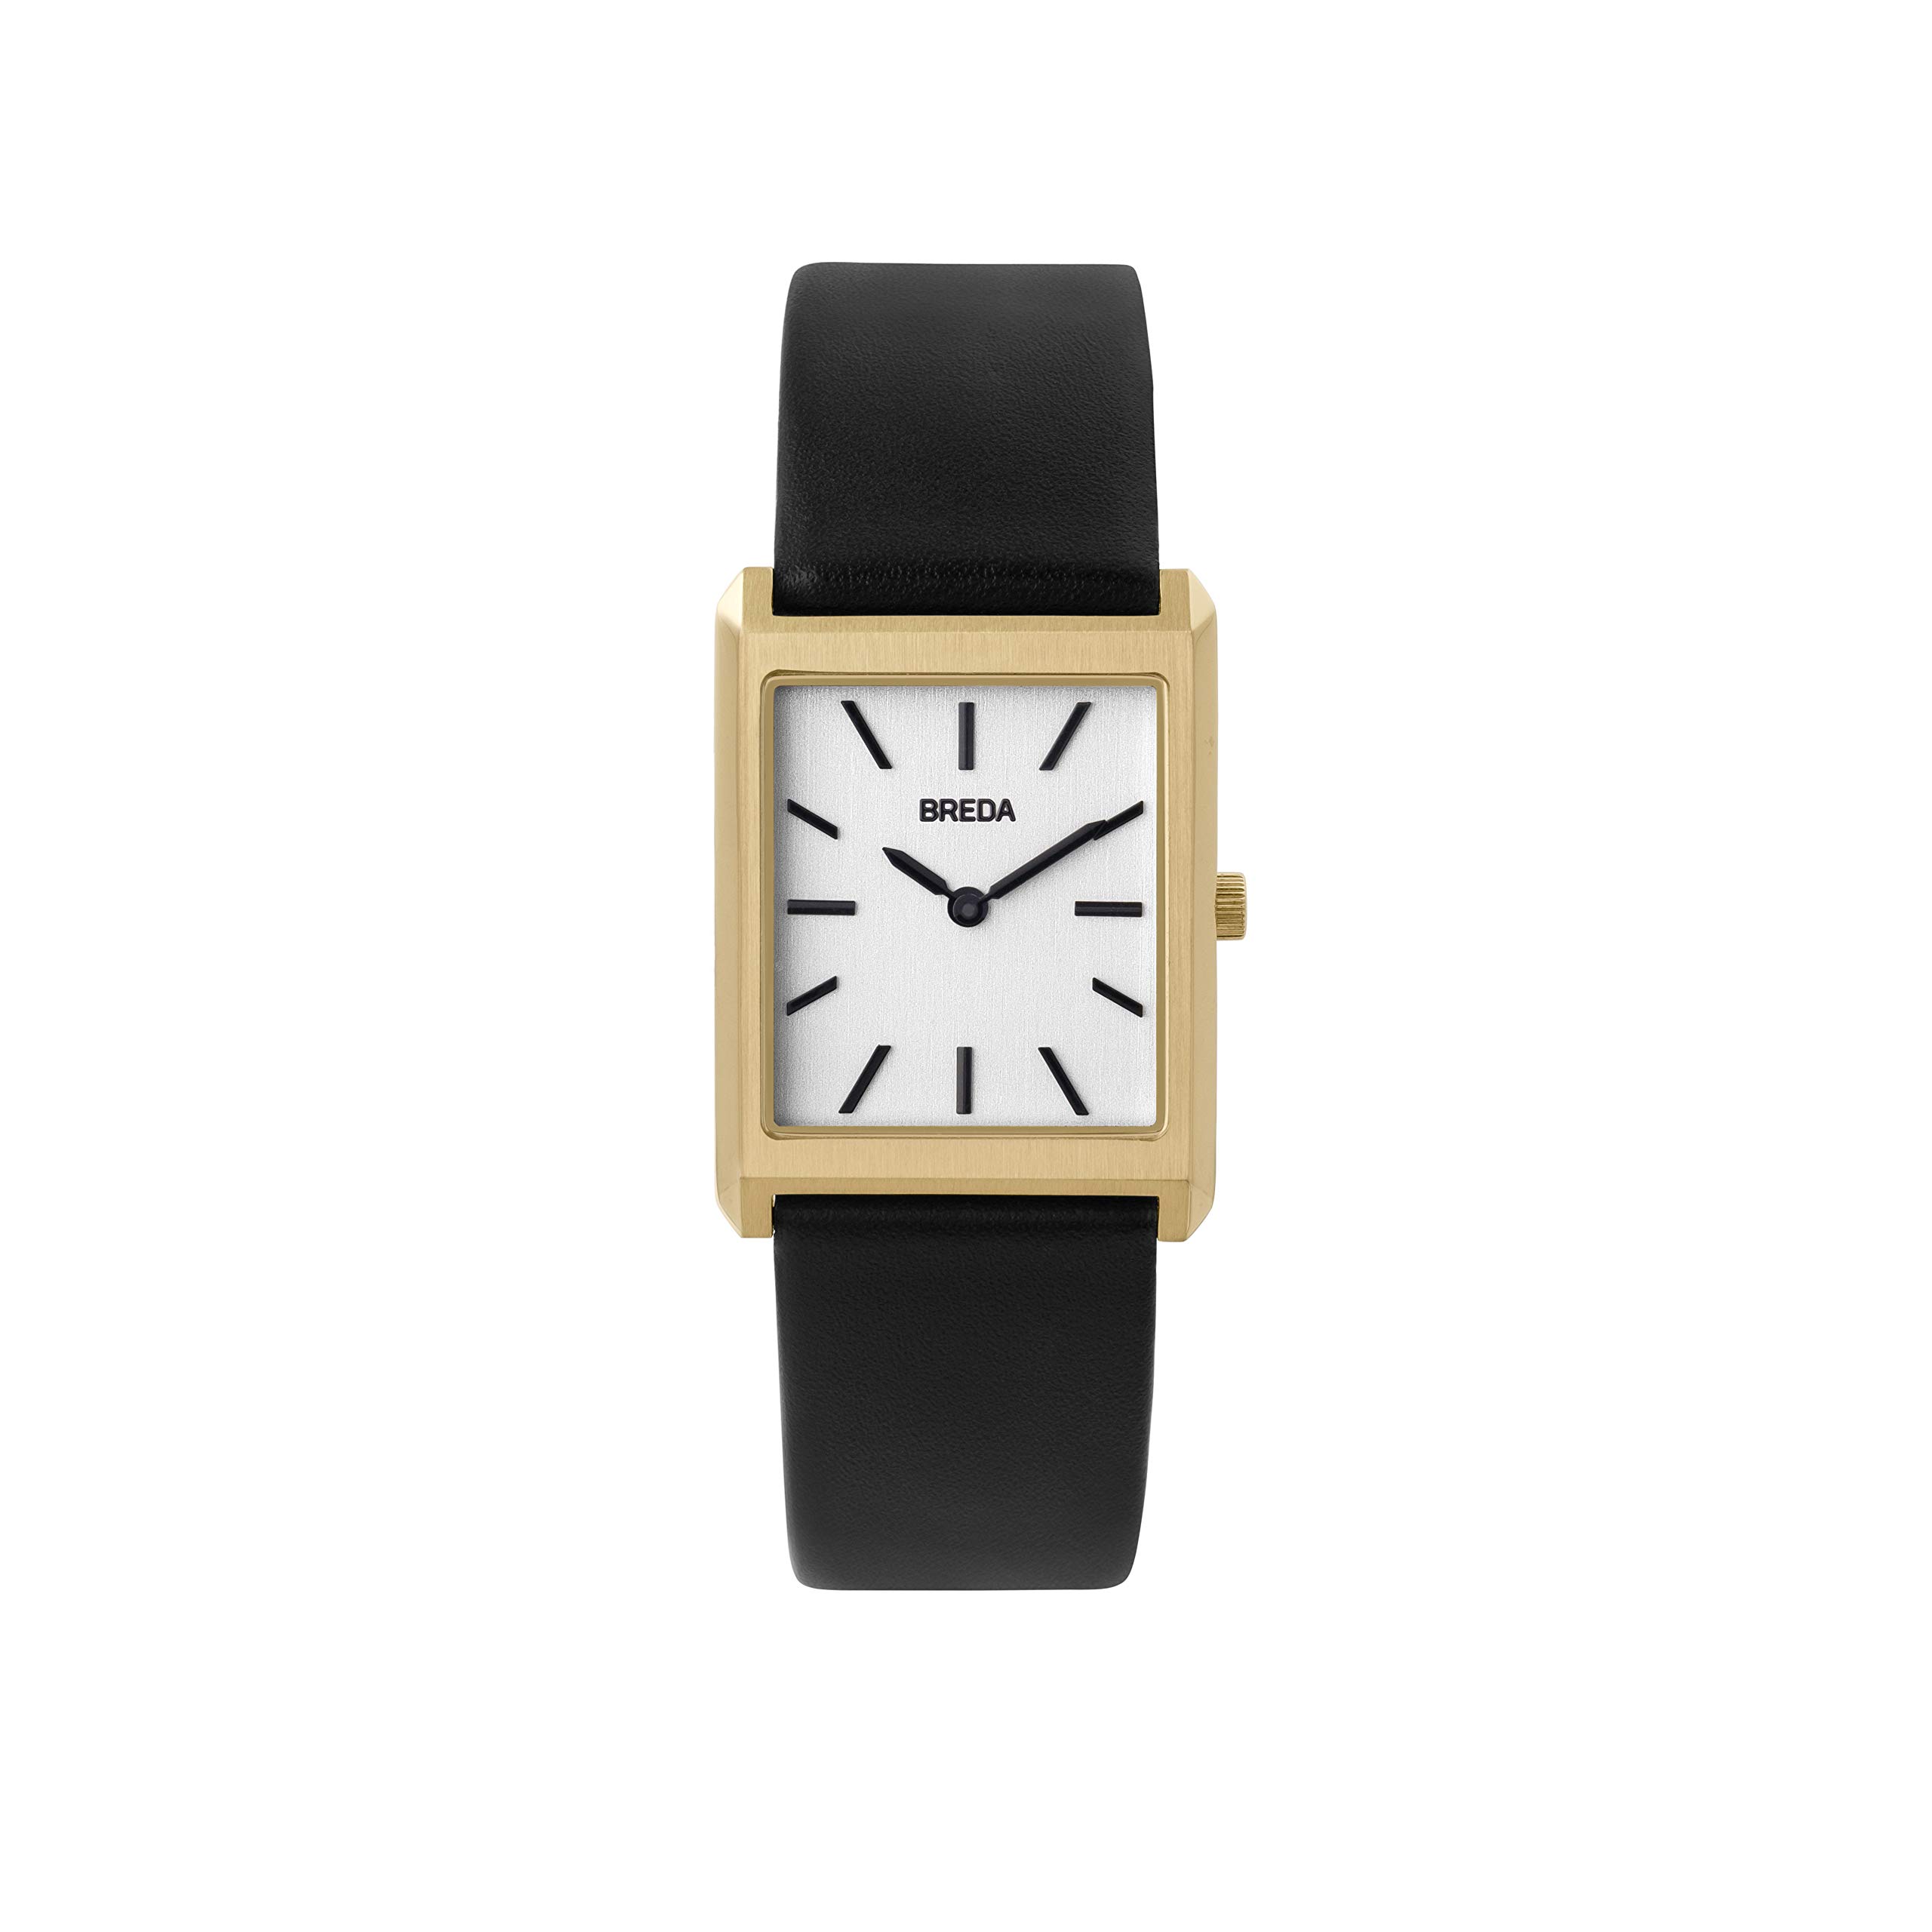 BREDA Virgil 1736b gold Square Wrist Watch with genuine Black Leather Band, 26MM